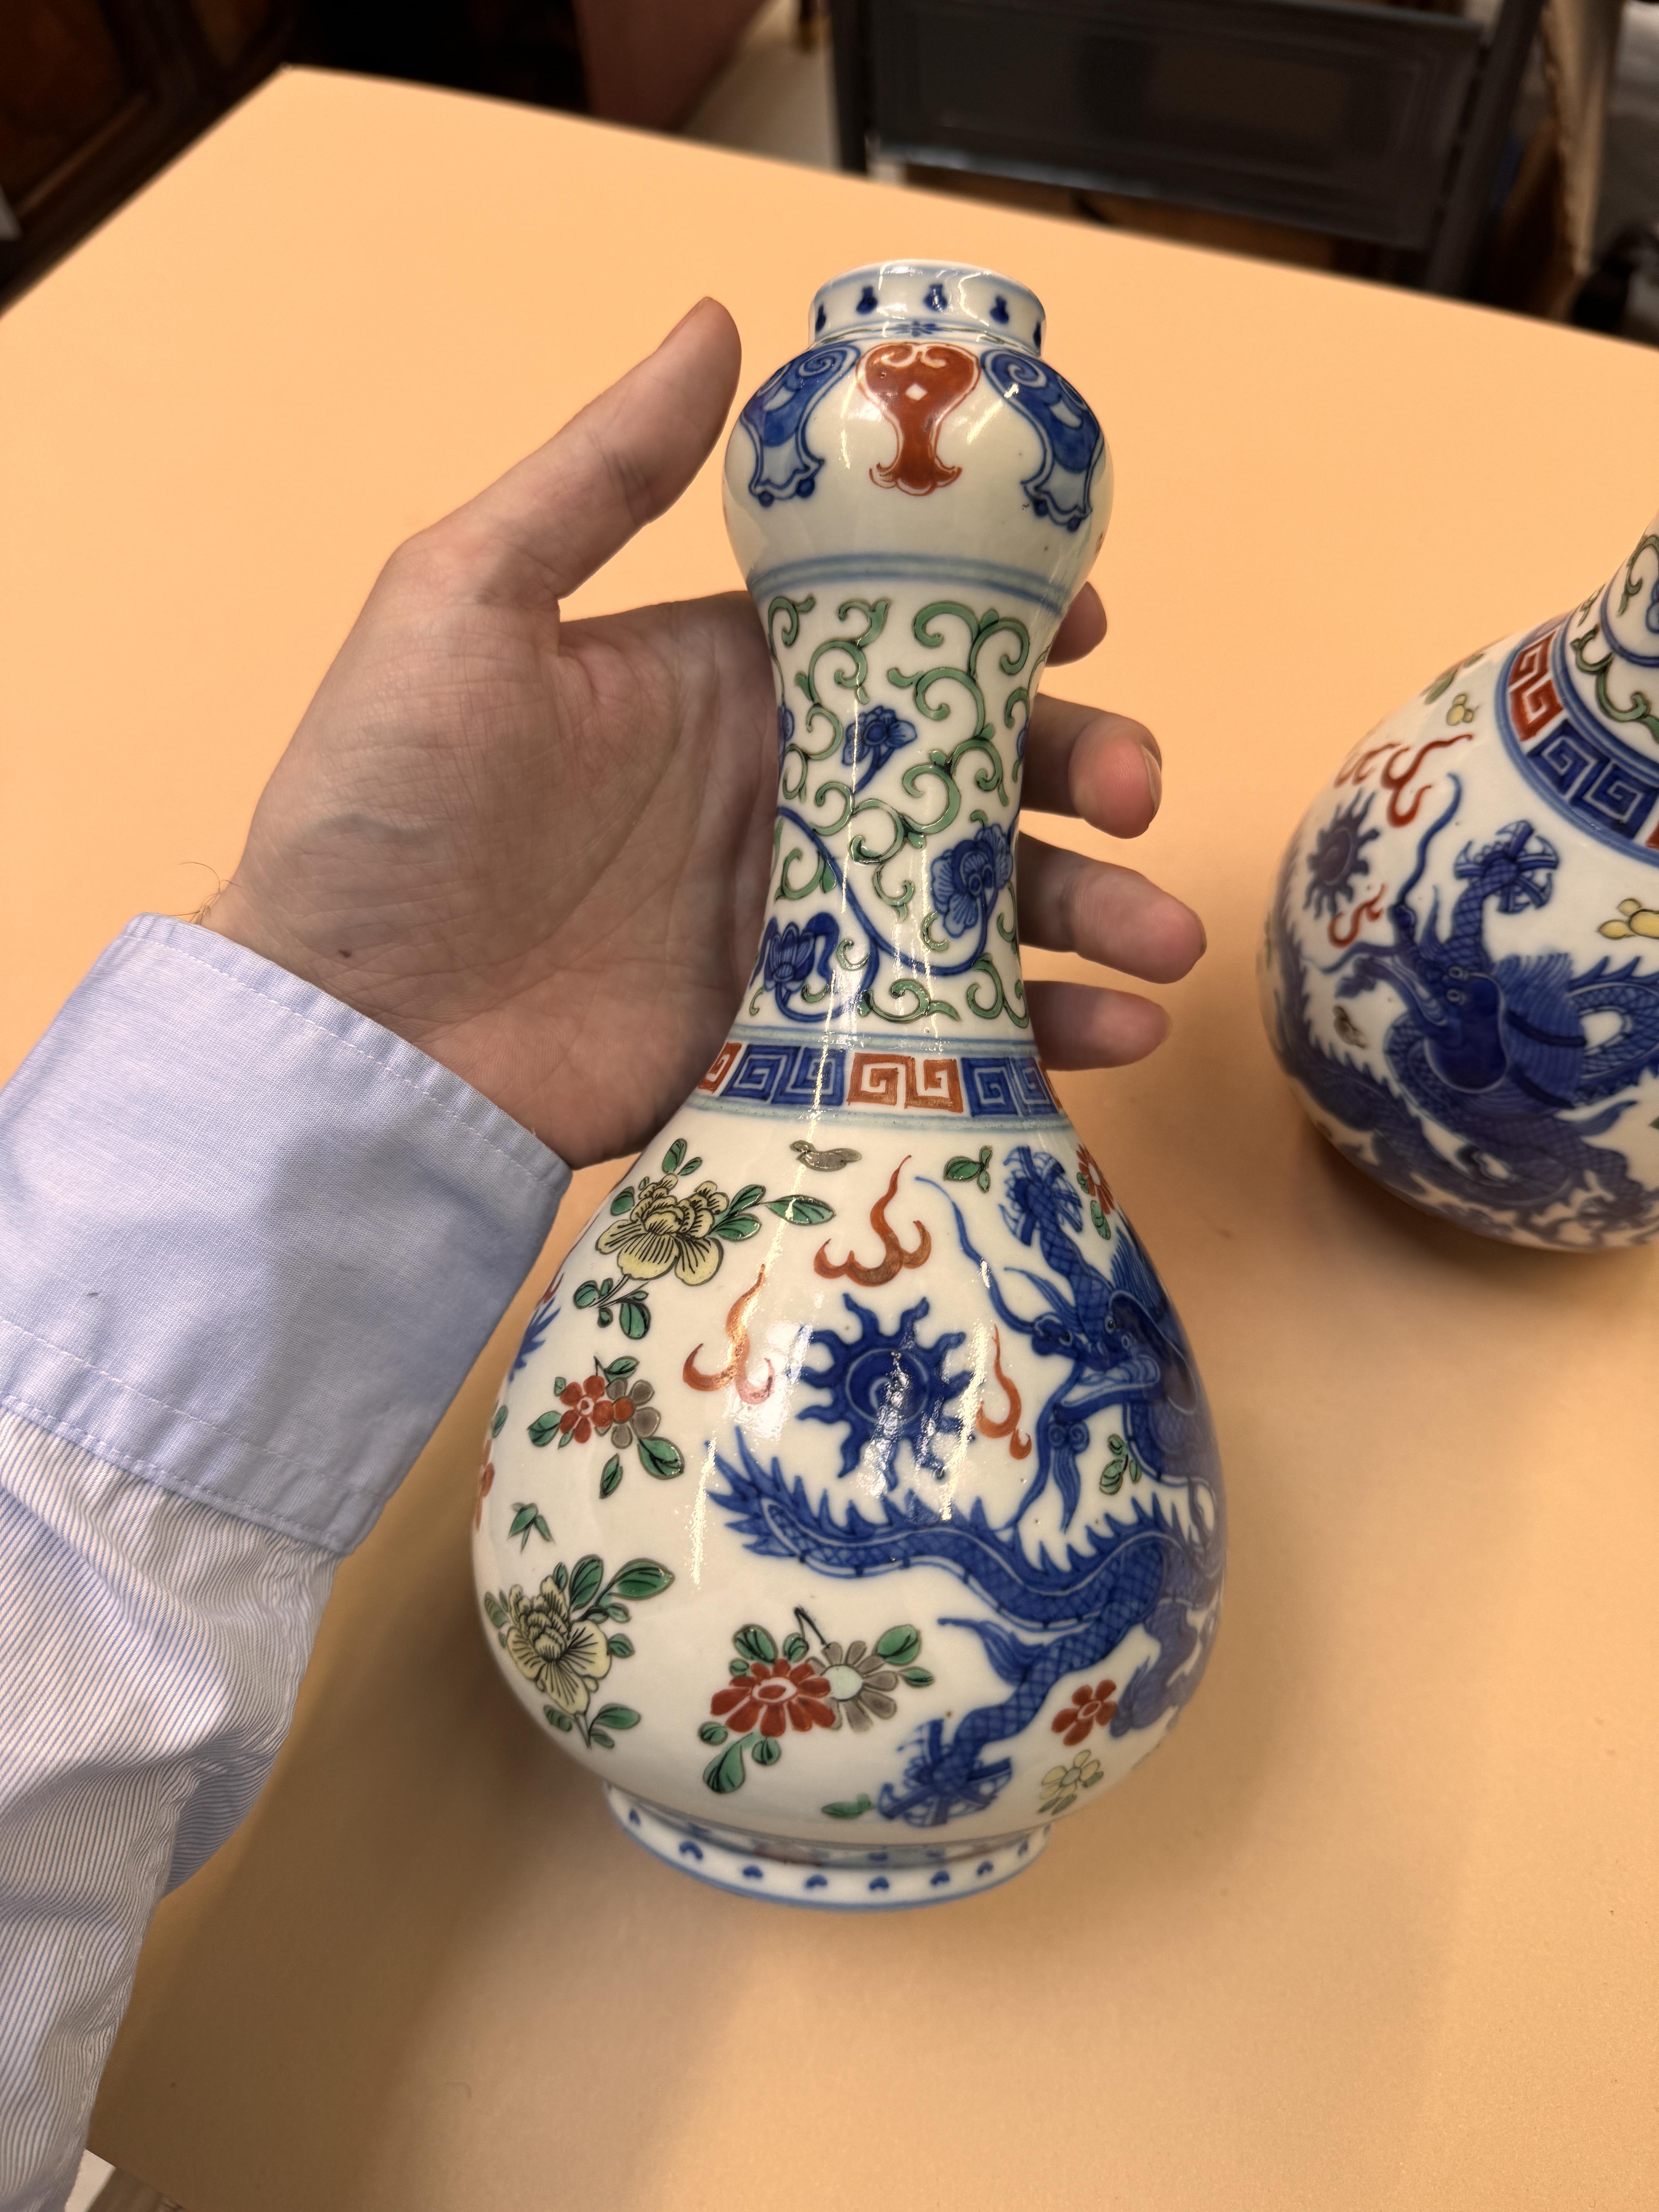 A PAIR OF CHINESE WUCAI 'DRAGON' VASES 民國時期 五彩龍趕珠紋瓶一對 《大明嘉靖年製》款 - Image 19 of 19